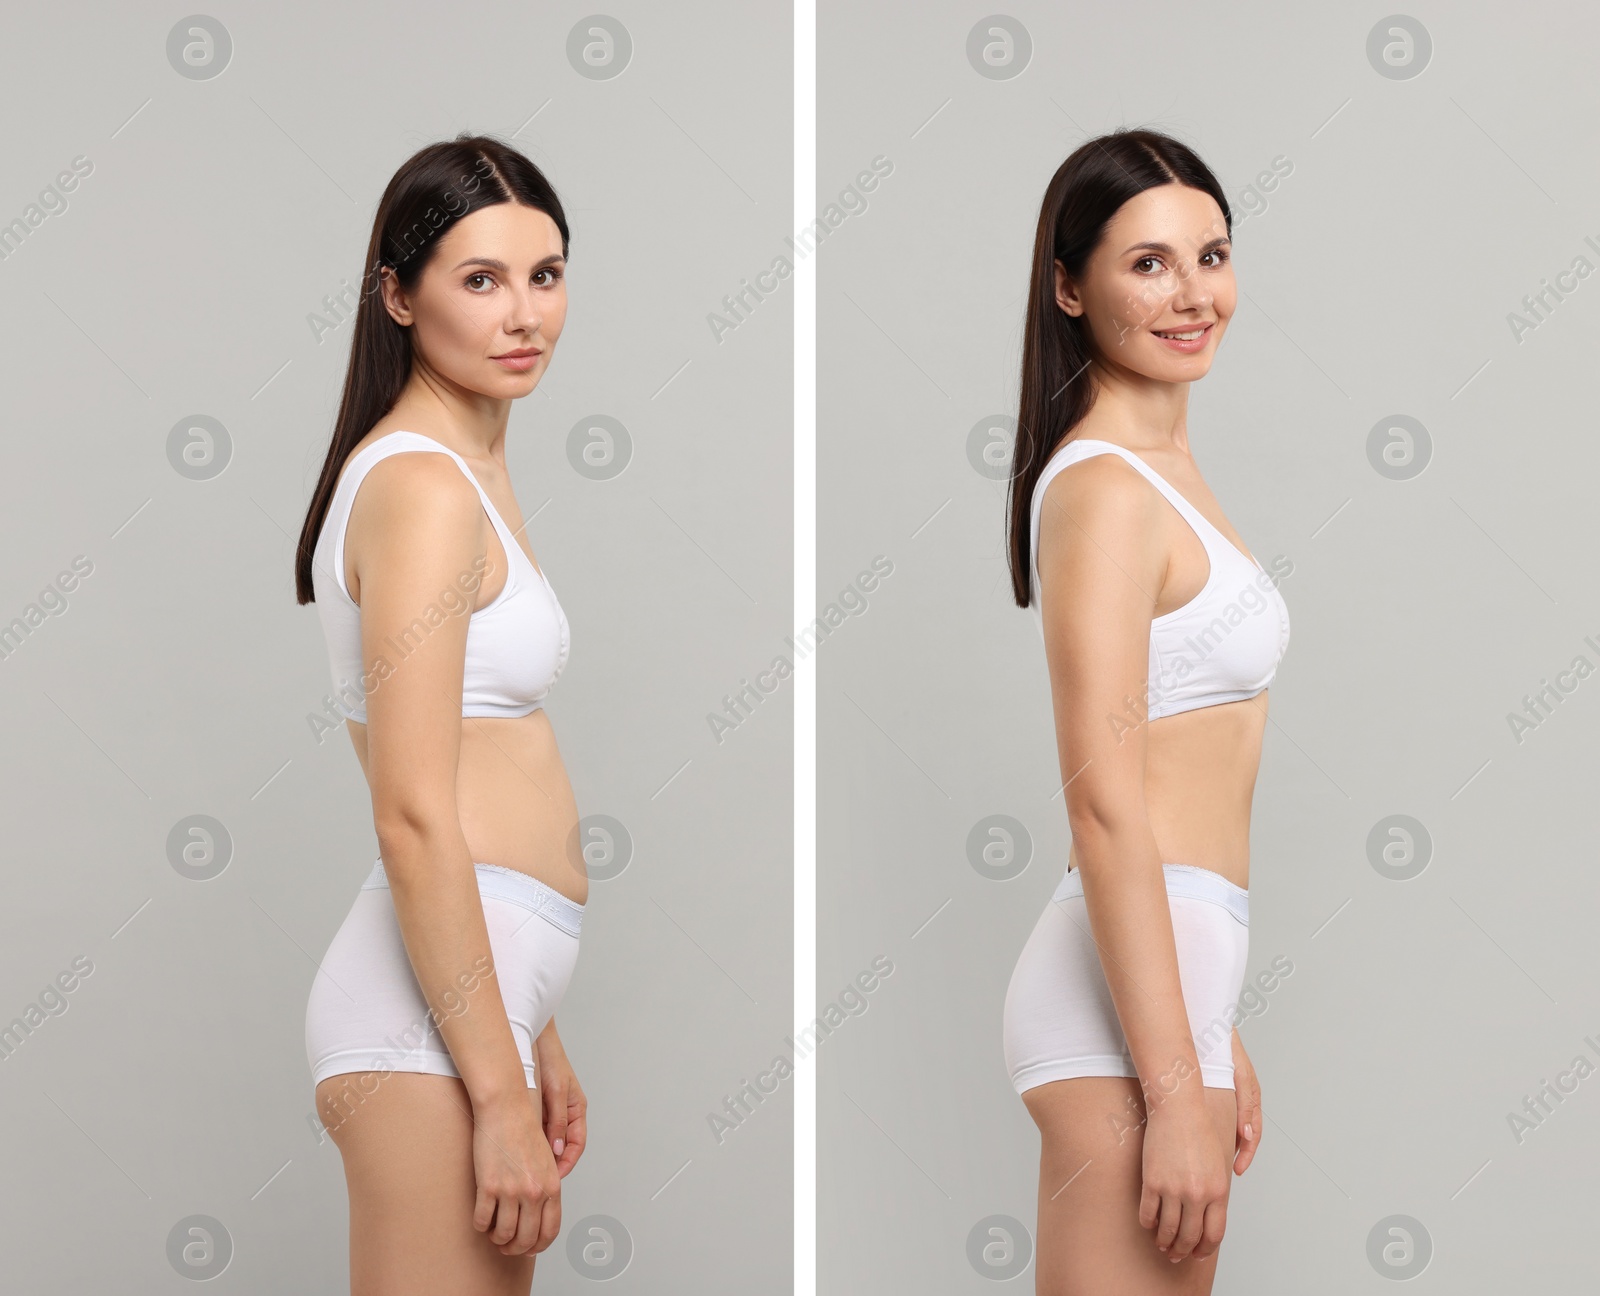 Image of Collage with portraits of woman before and after weight loss on light background